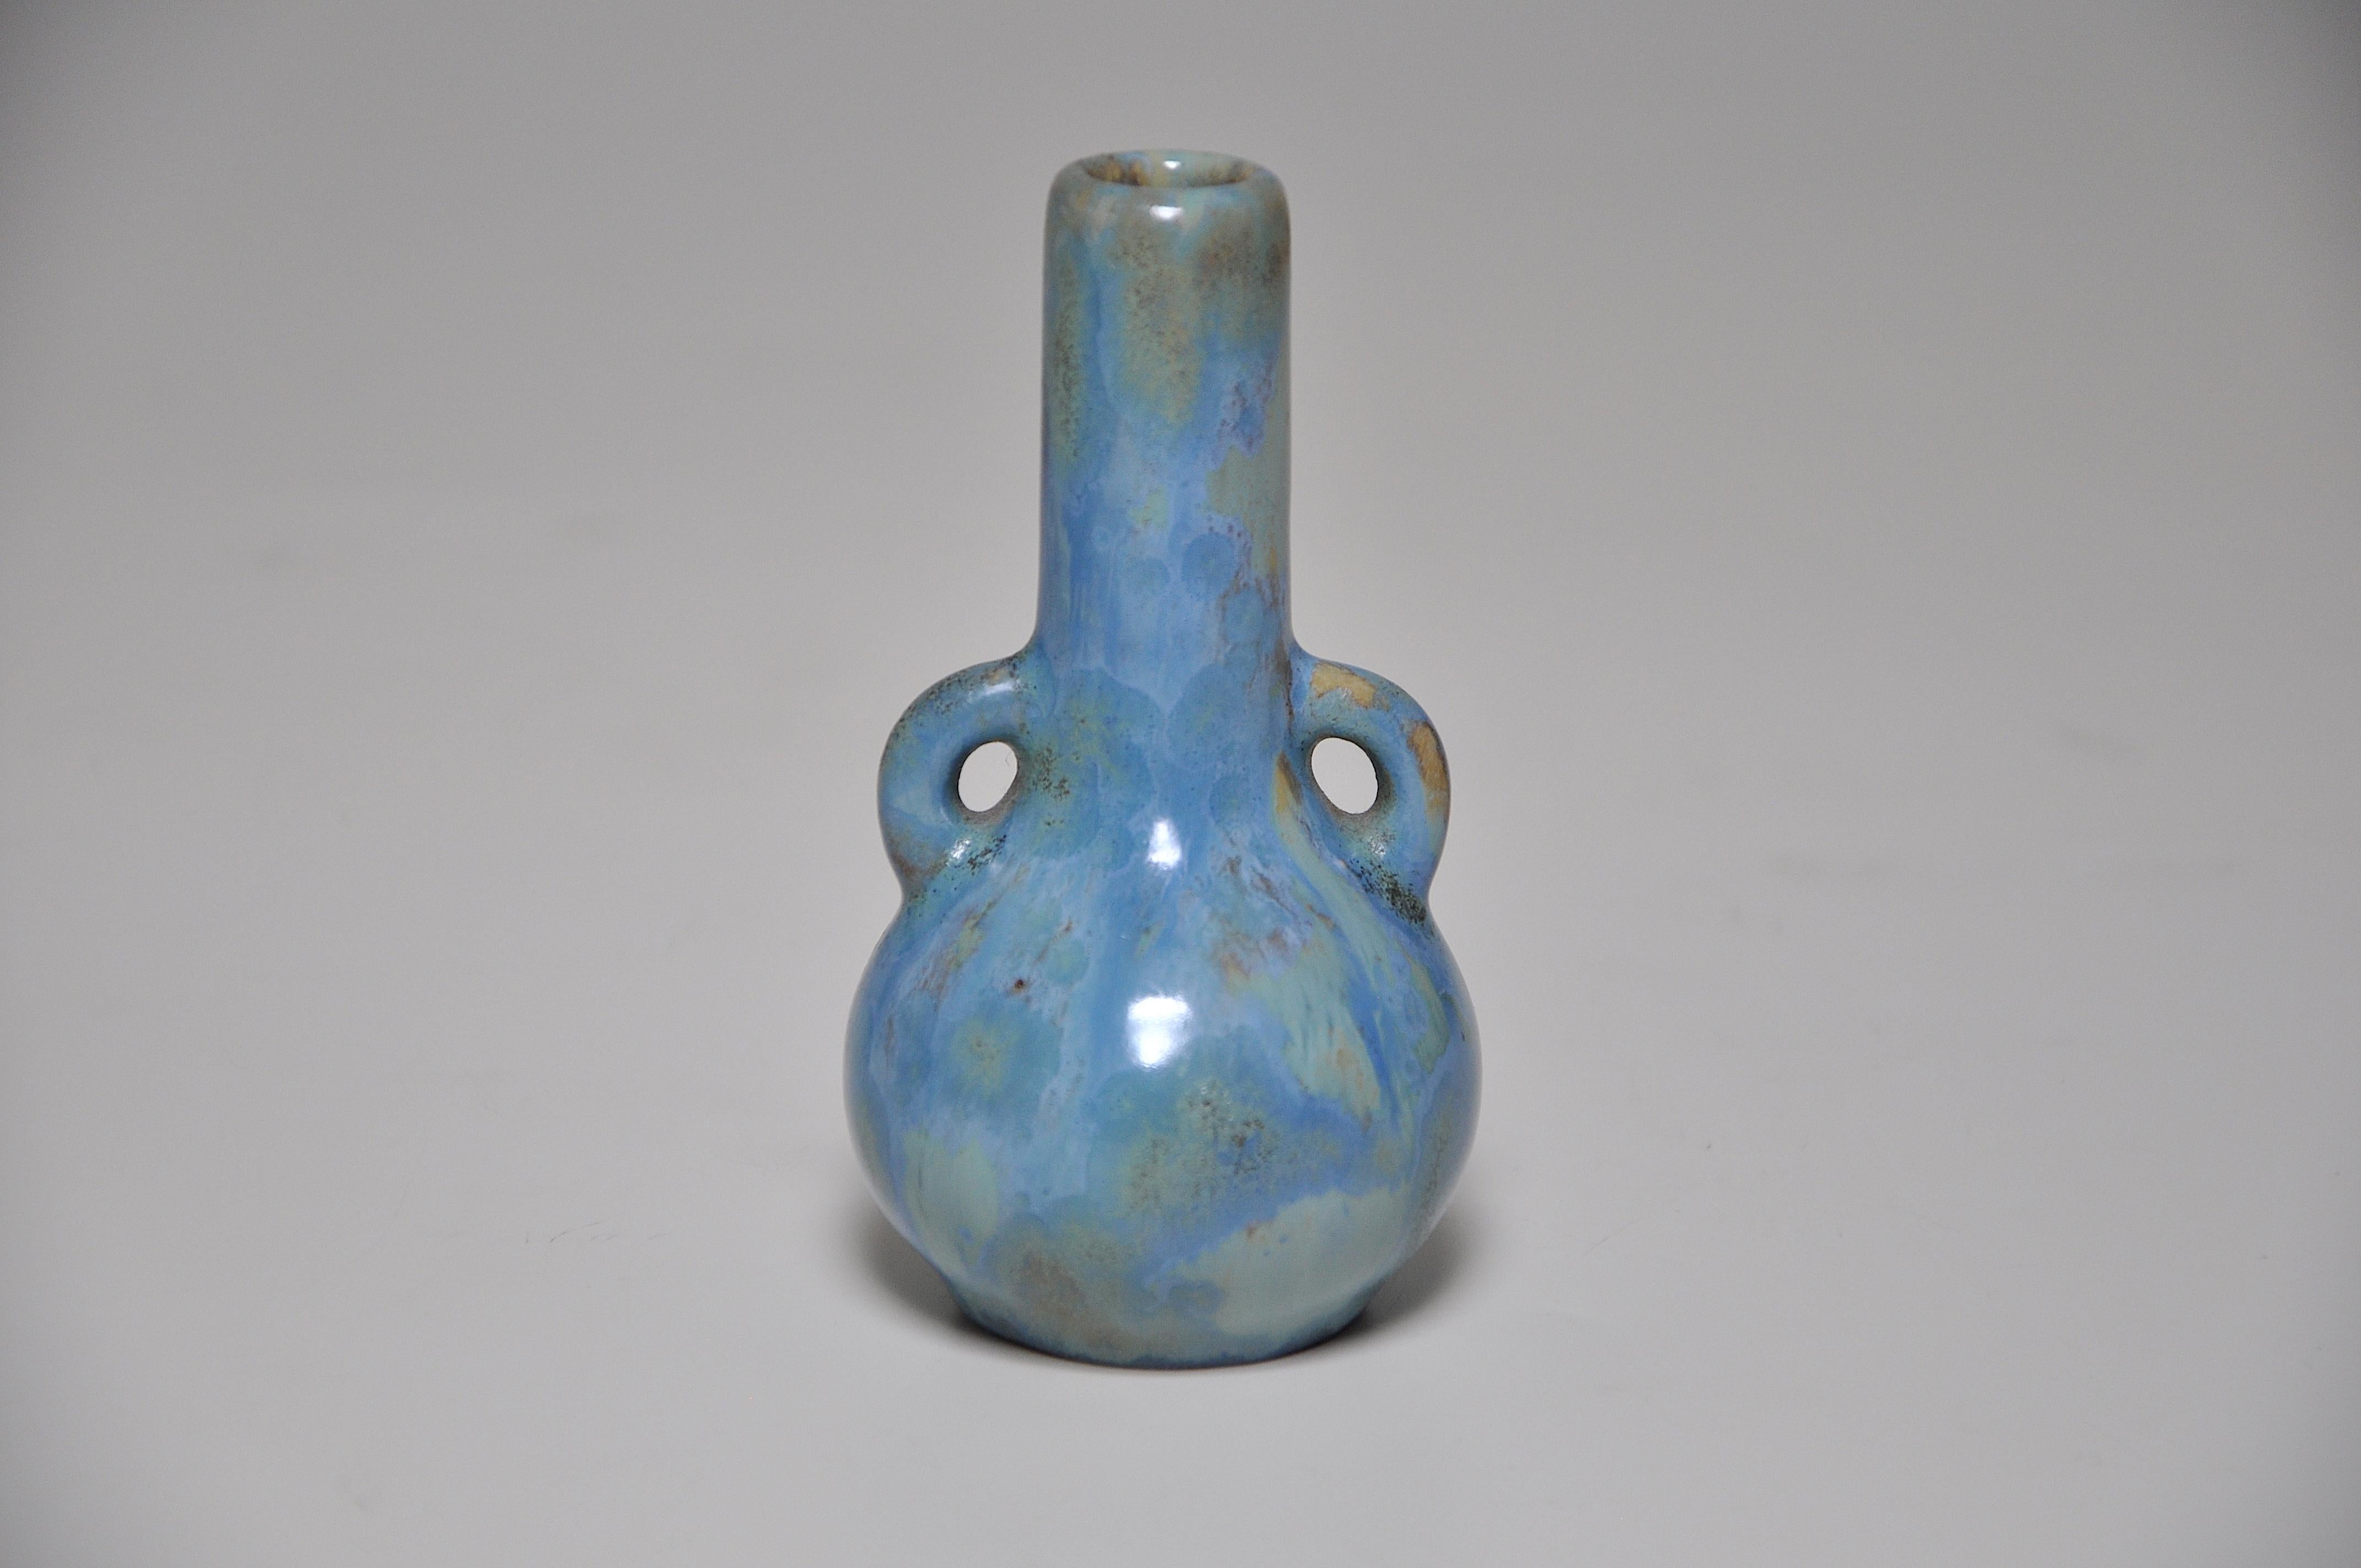 An exquisite rare miniature stoneware vase of bulbous form, with tiny twin handles and a long neck, covered with a flowing strong blue glaze, crystalline in places, on a yellow ground. By the ‘Pierrefonds’ French ceramic studio in Oise, Picardie,